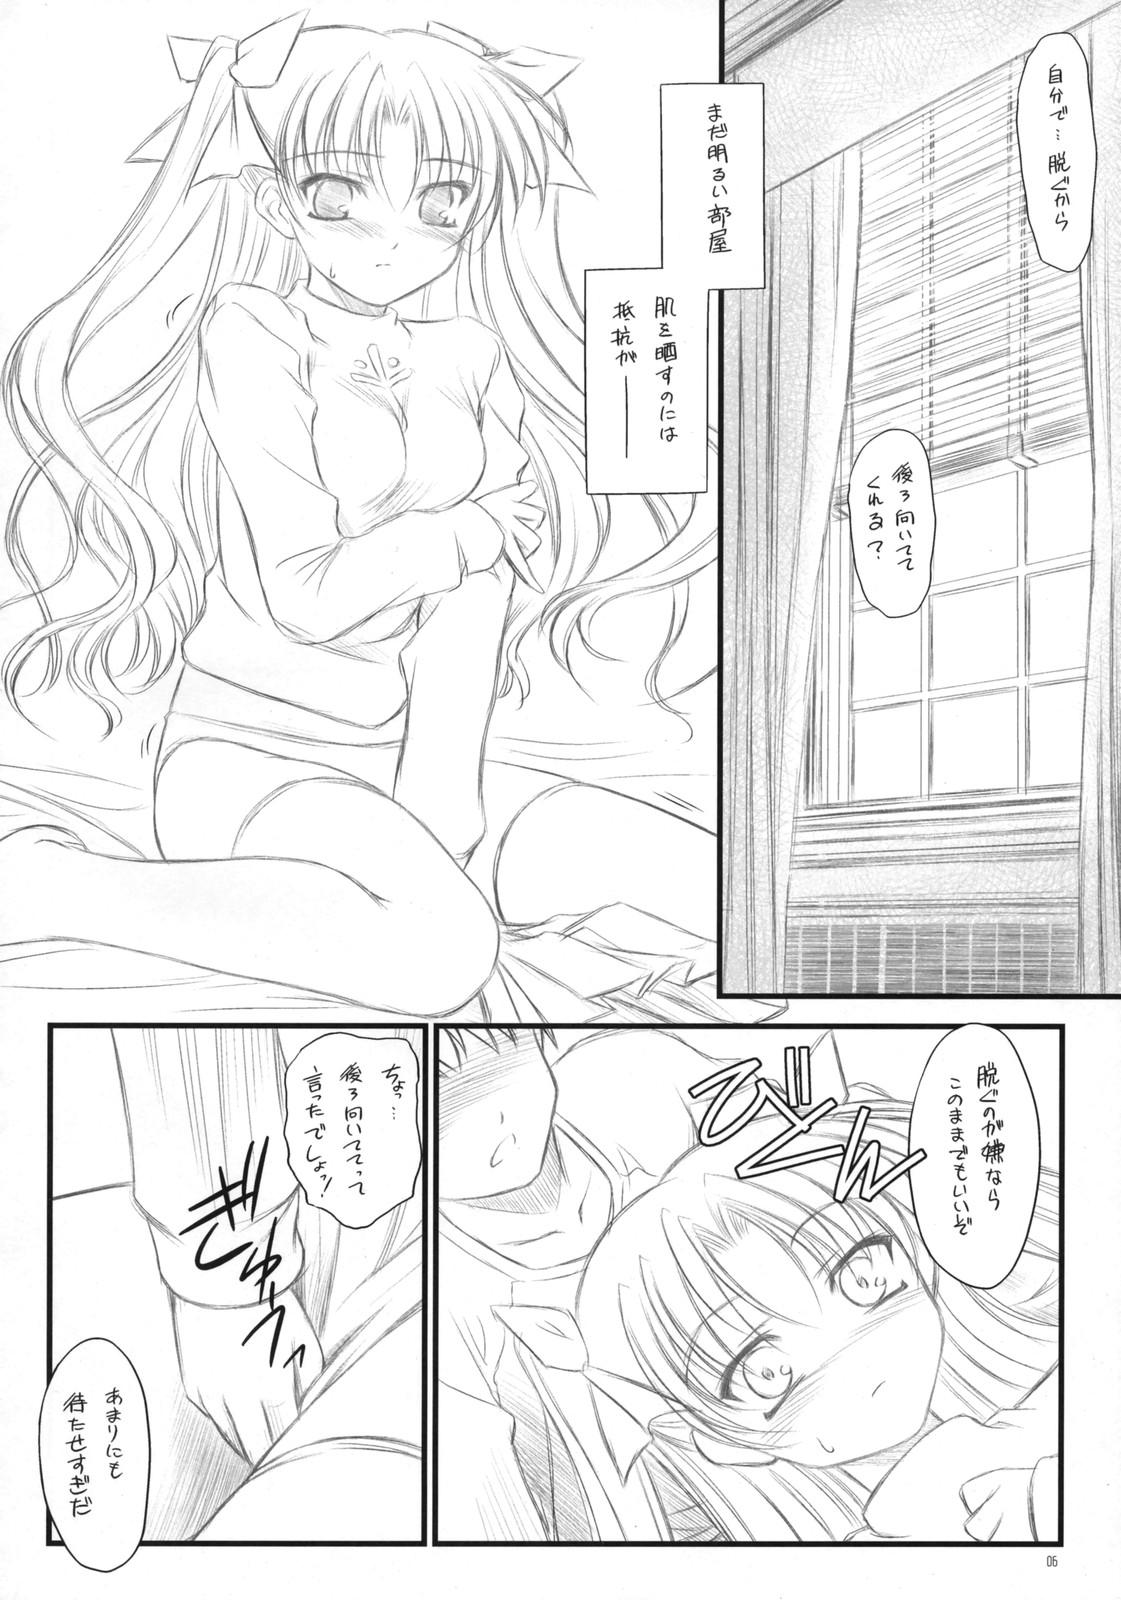 Couch Prunus Persica - Fate stay night Pussy Eating - Page 5